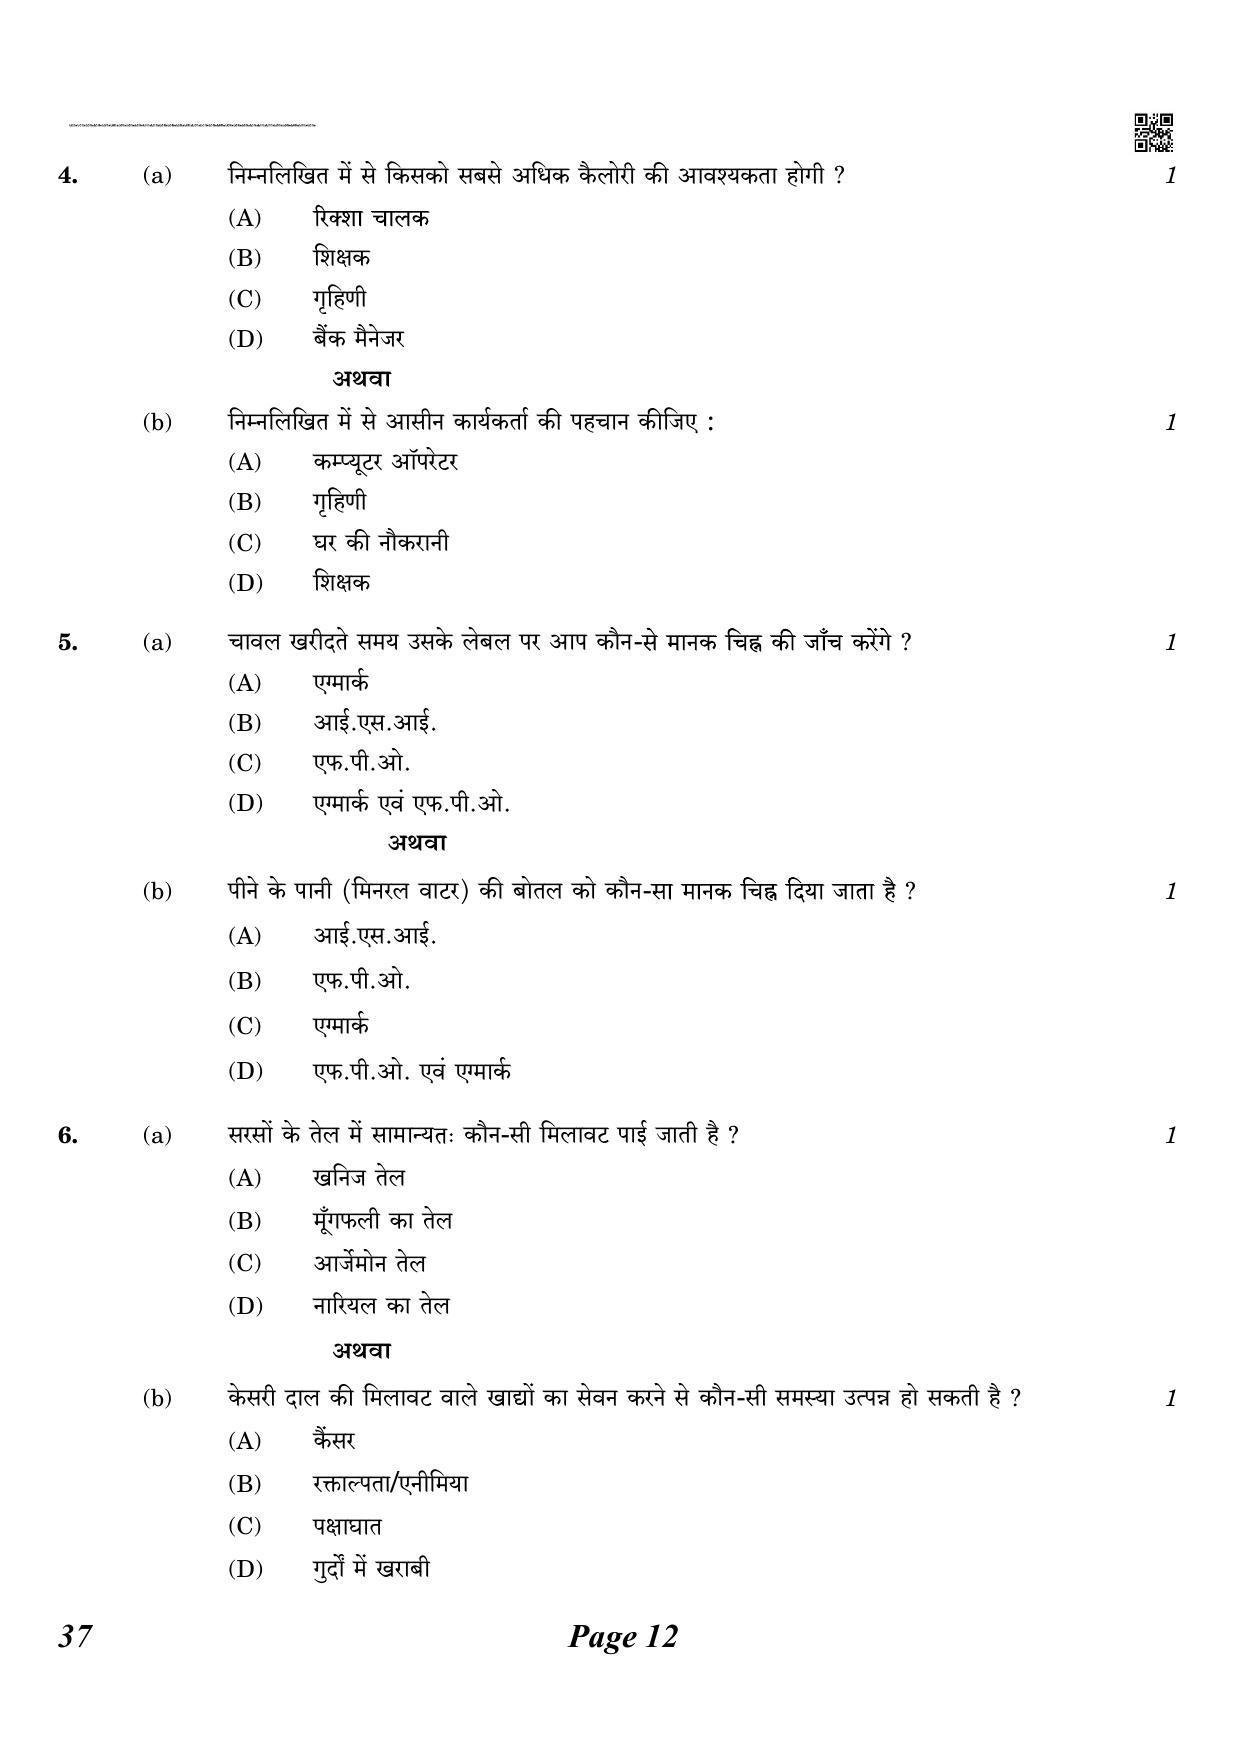 CBSE Class 10 QP_064_Home_Science 2021 Compartment Question Paper - Page 12